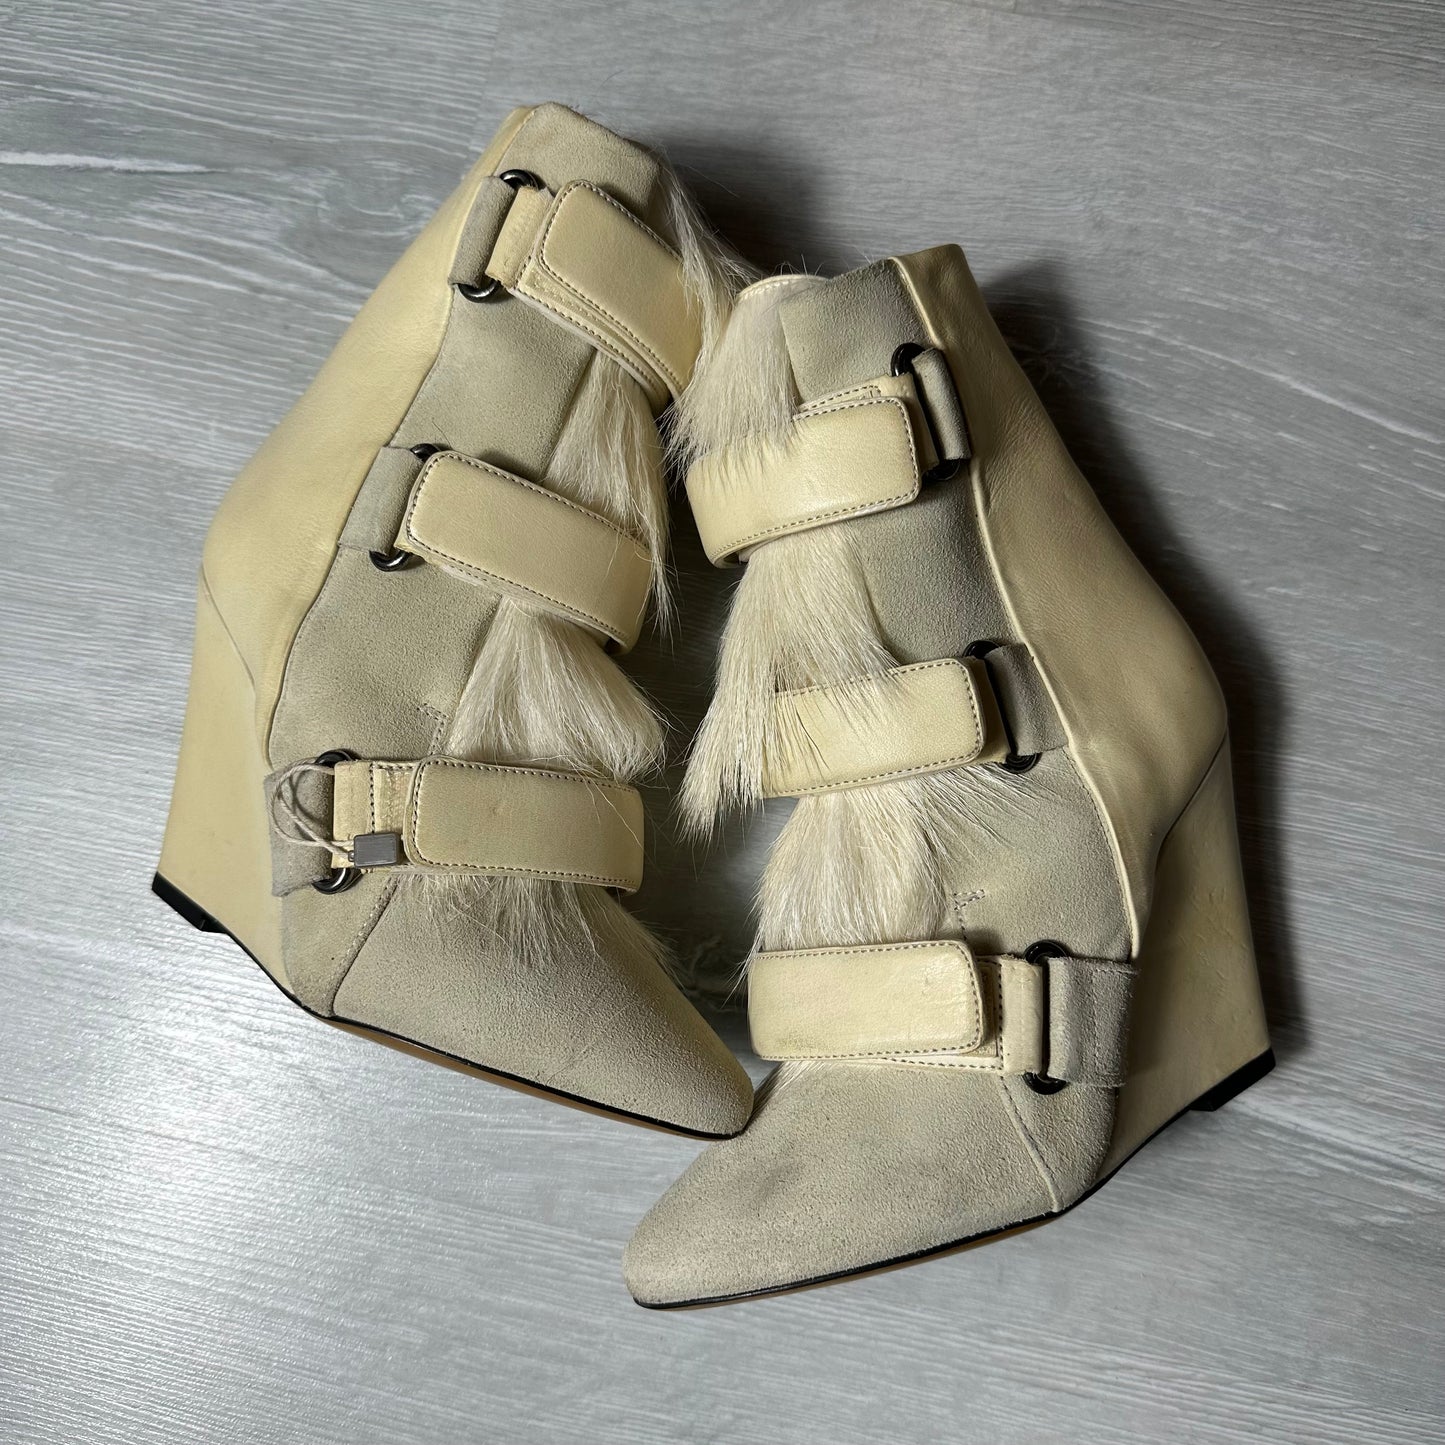 Isabel Marant AW13 Wedge Fur Boots 35